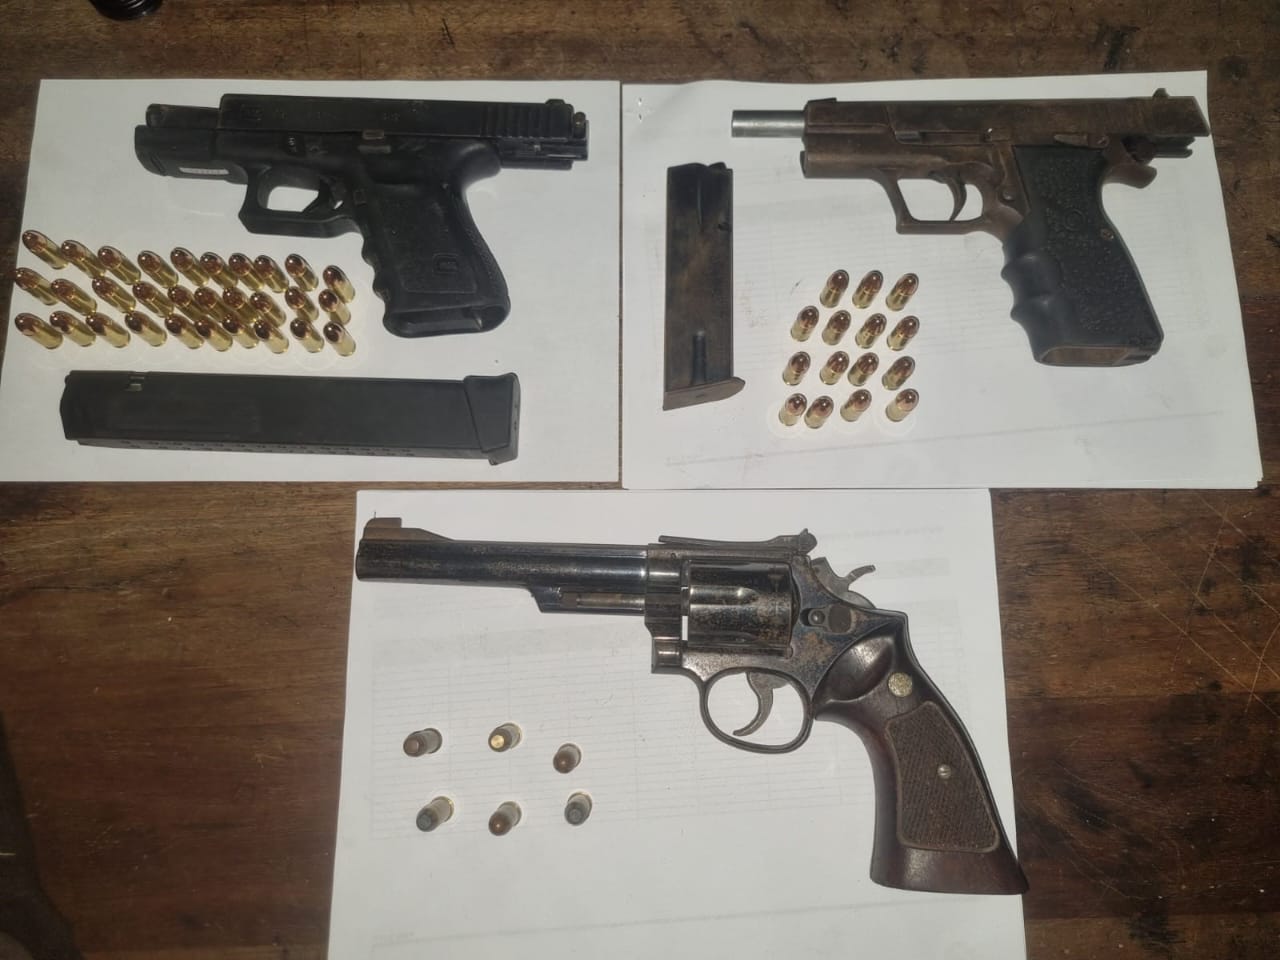 Police rid the streets of three unlicensed firearms and ammunition and recovered a hijacked vehicle